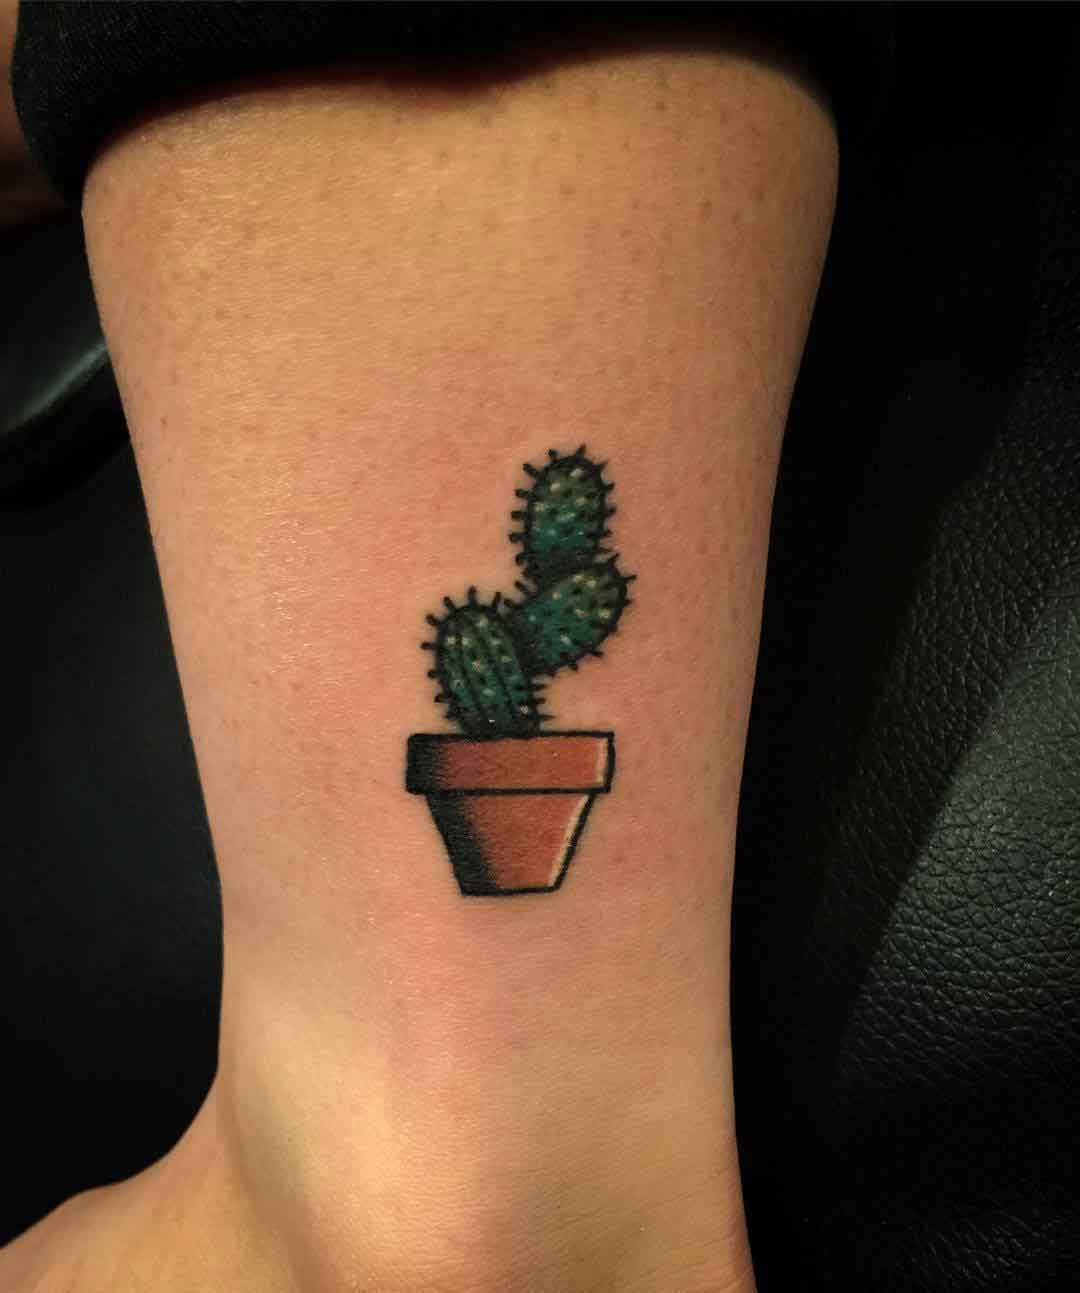 Cactus Tattoo Meaning: A Symbol of Strength, Endurance, and Resilience